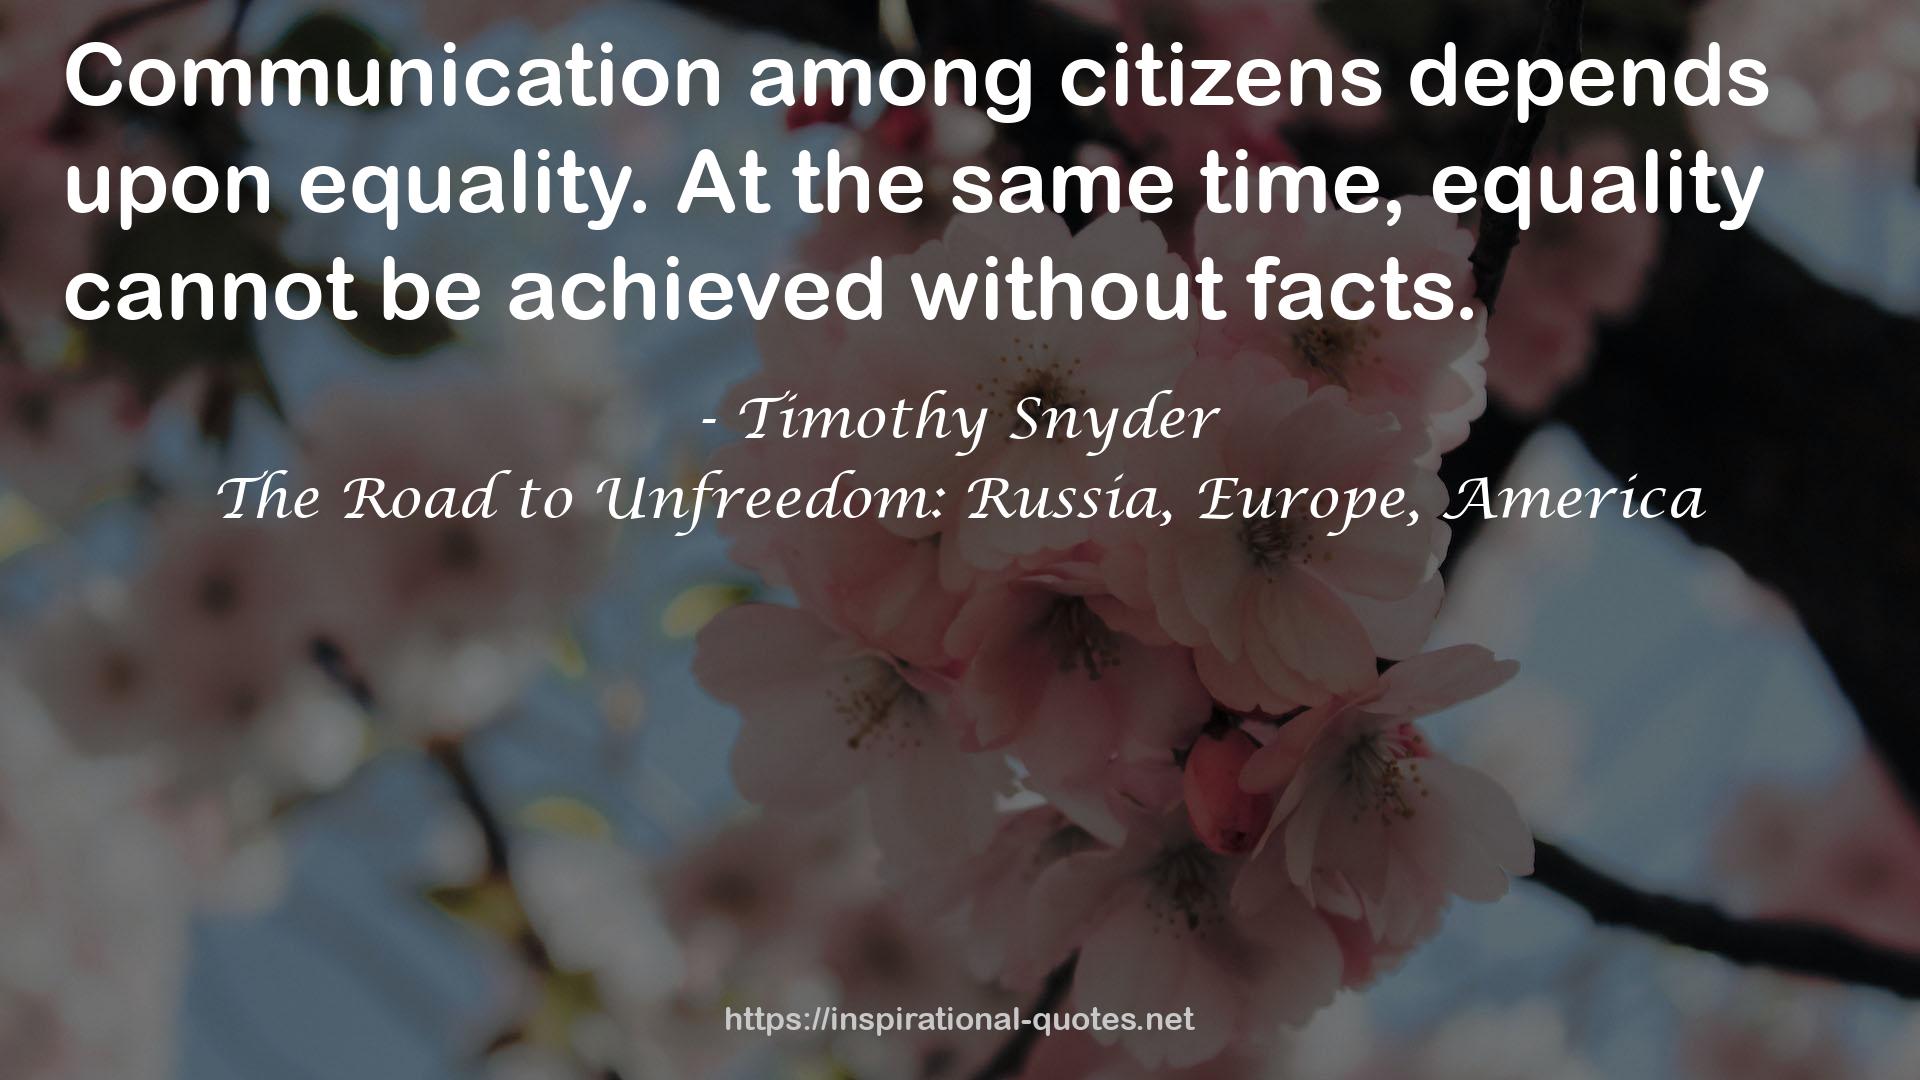 The Road to Unfreedom: Russia, Europe, America QUOTES